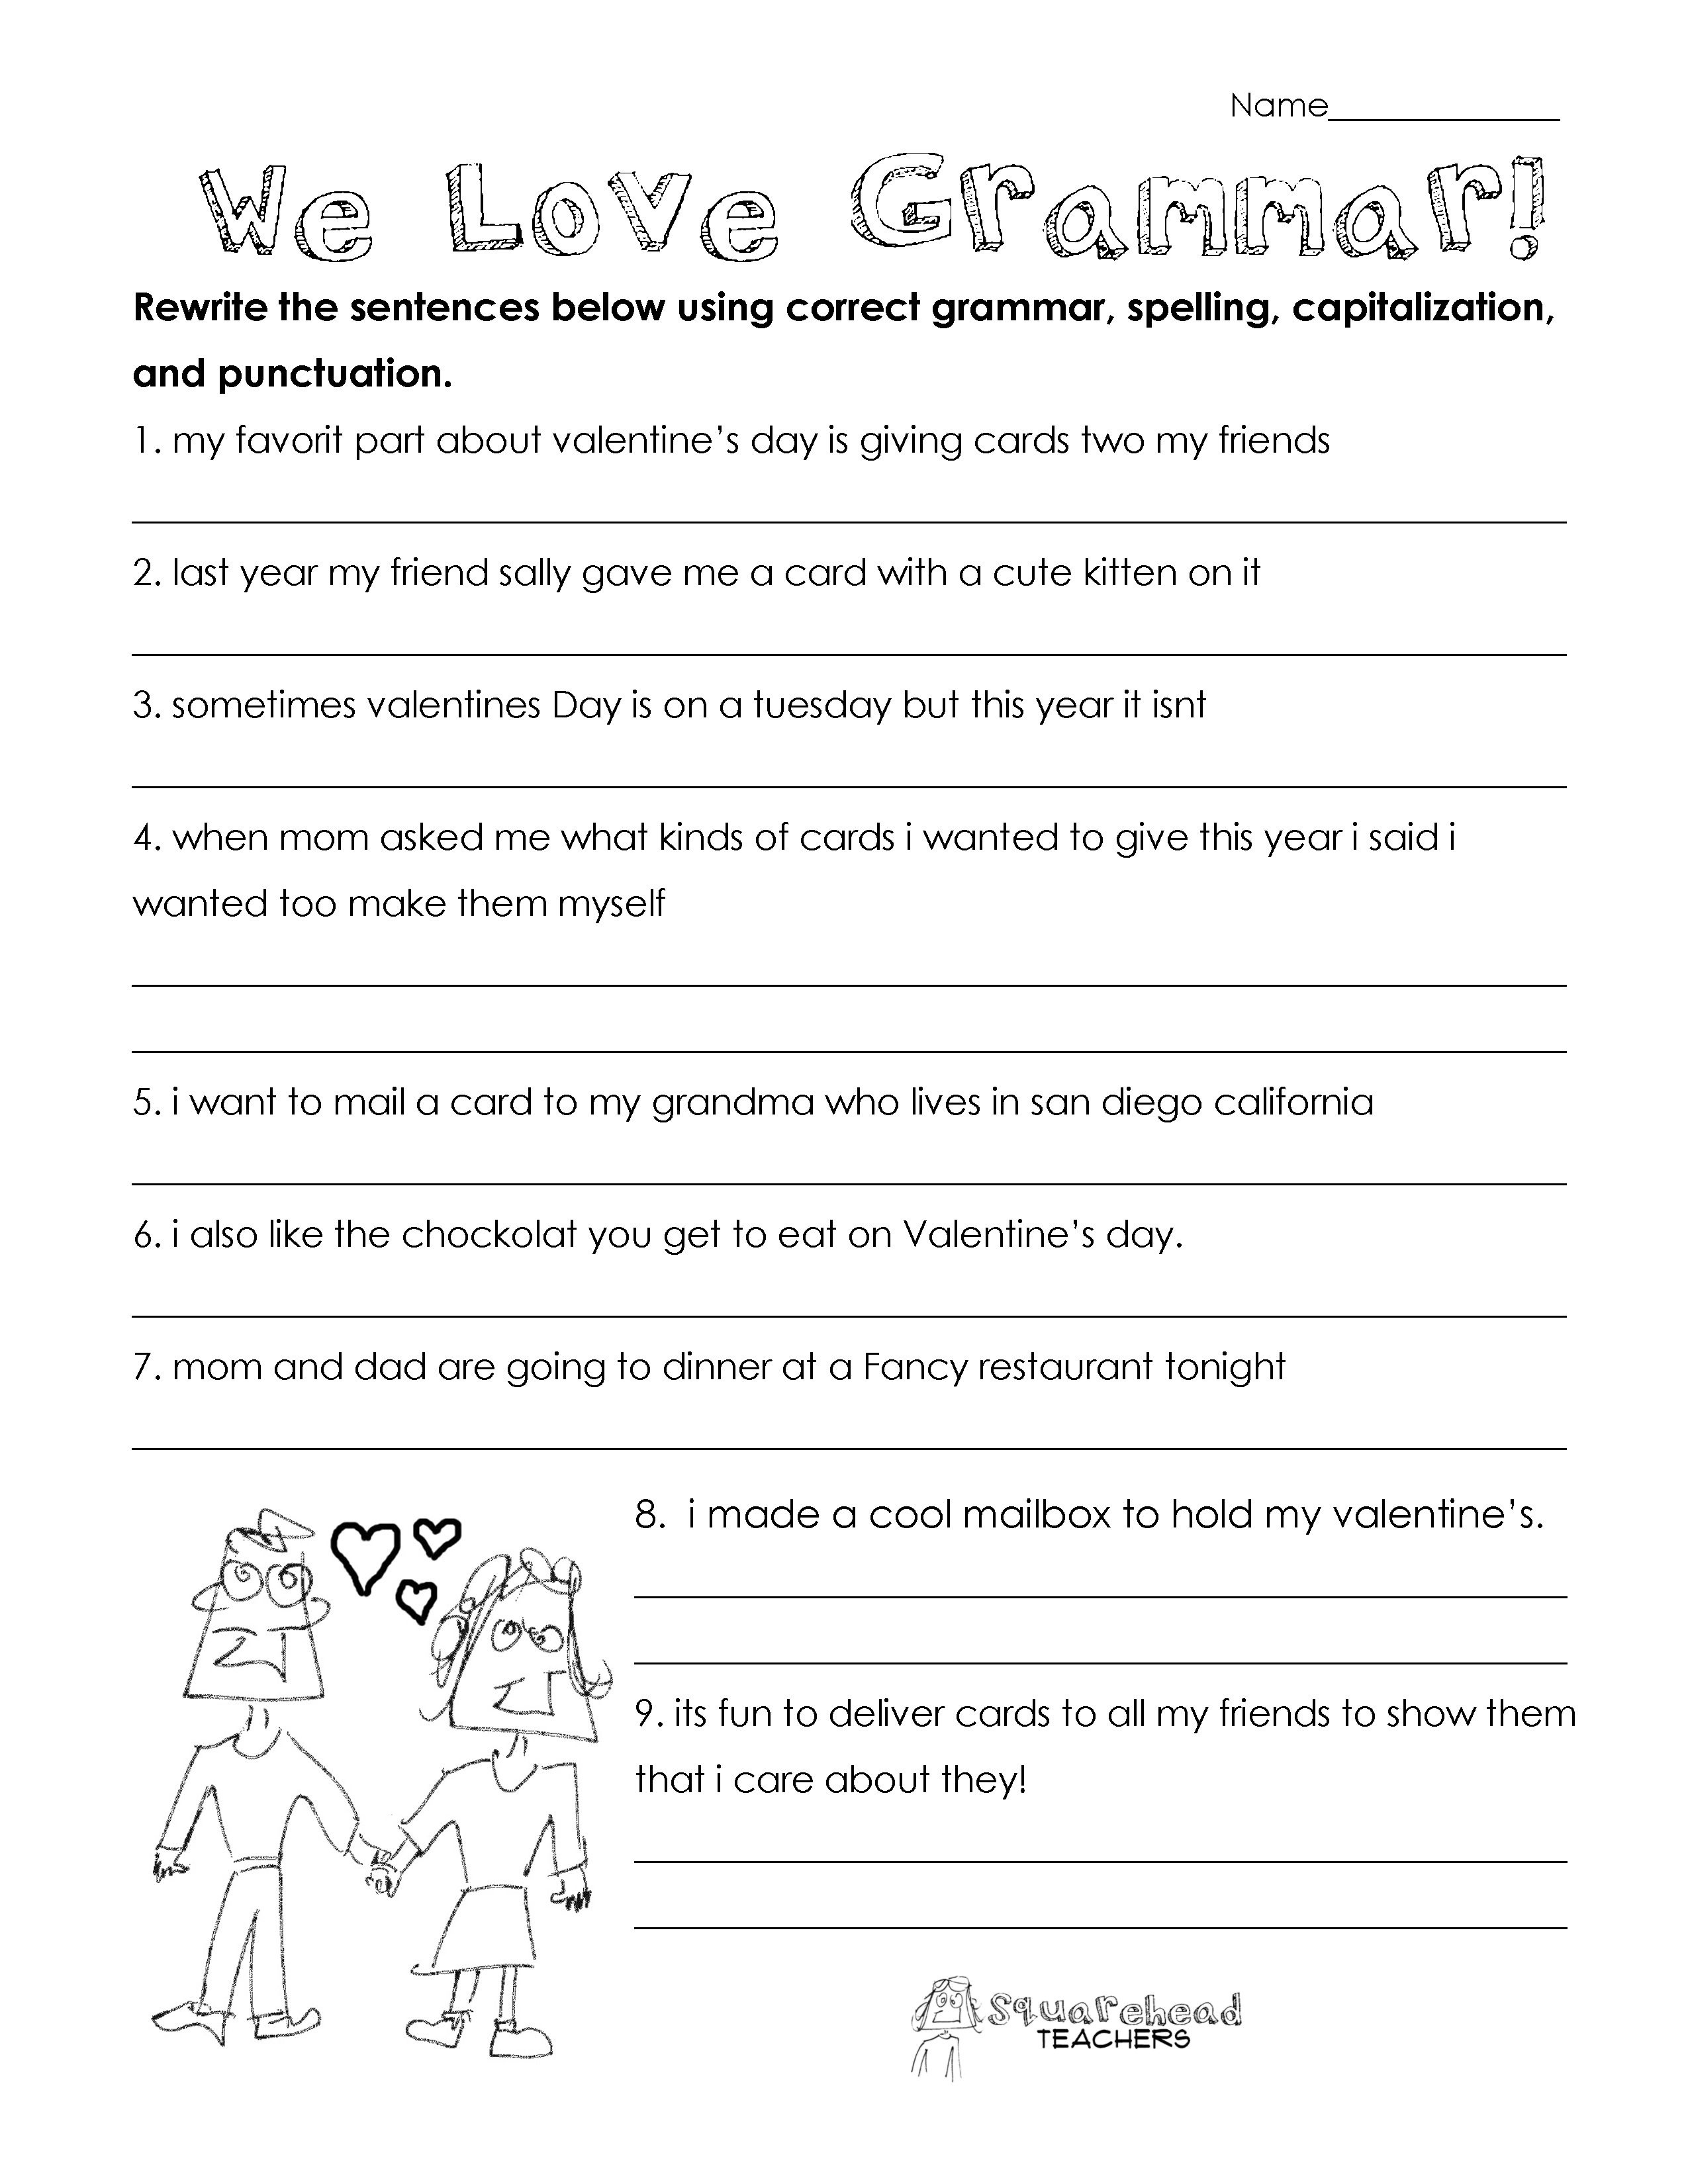 This Grammar Practice Worksheet Seems A Bit Too Tough For The - Free Printable Sentence Correction Worksheets